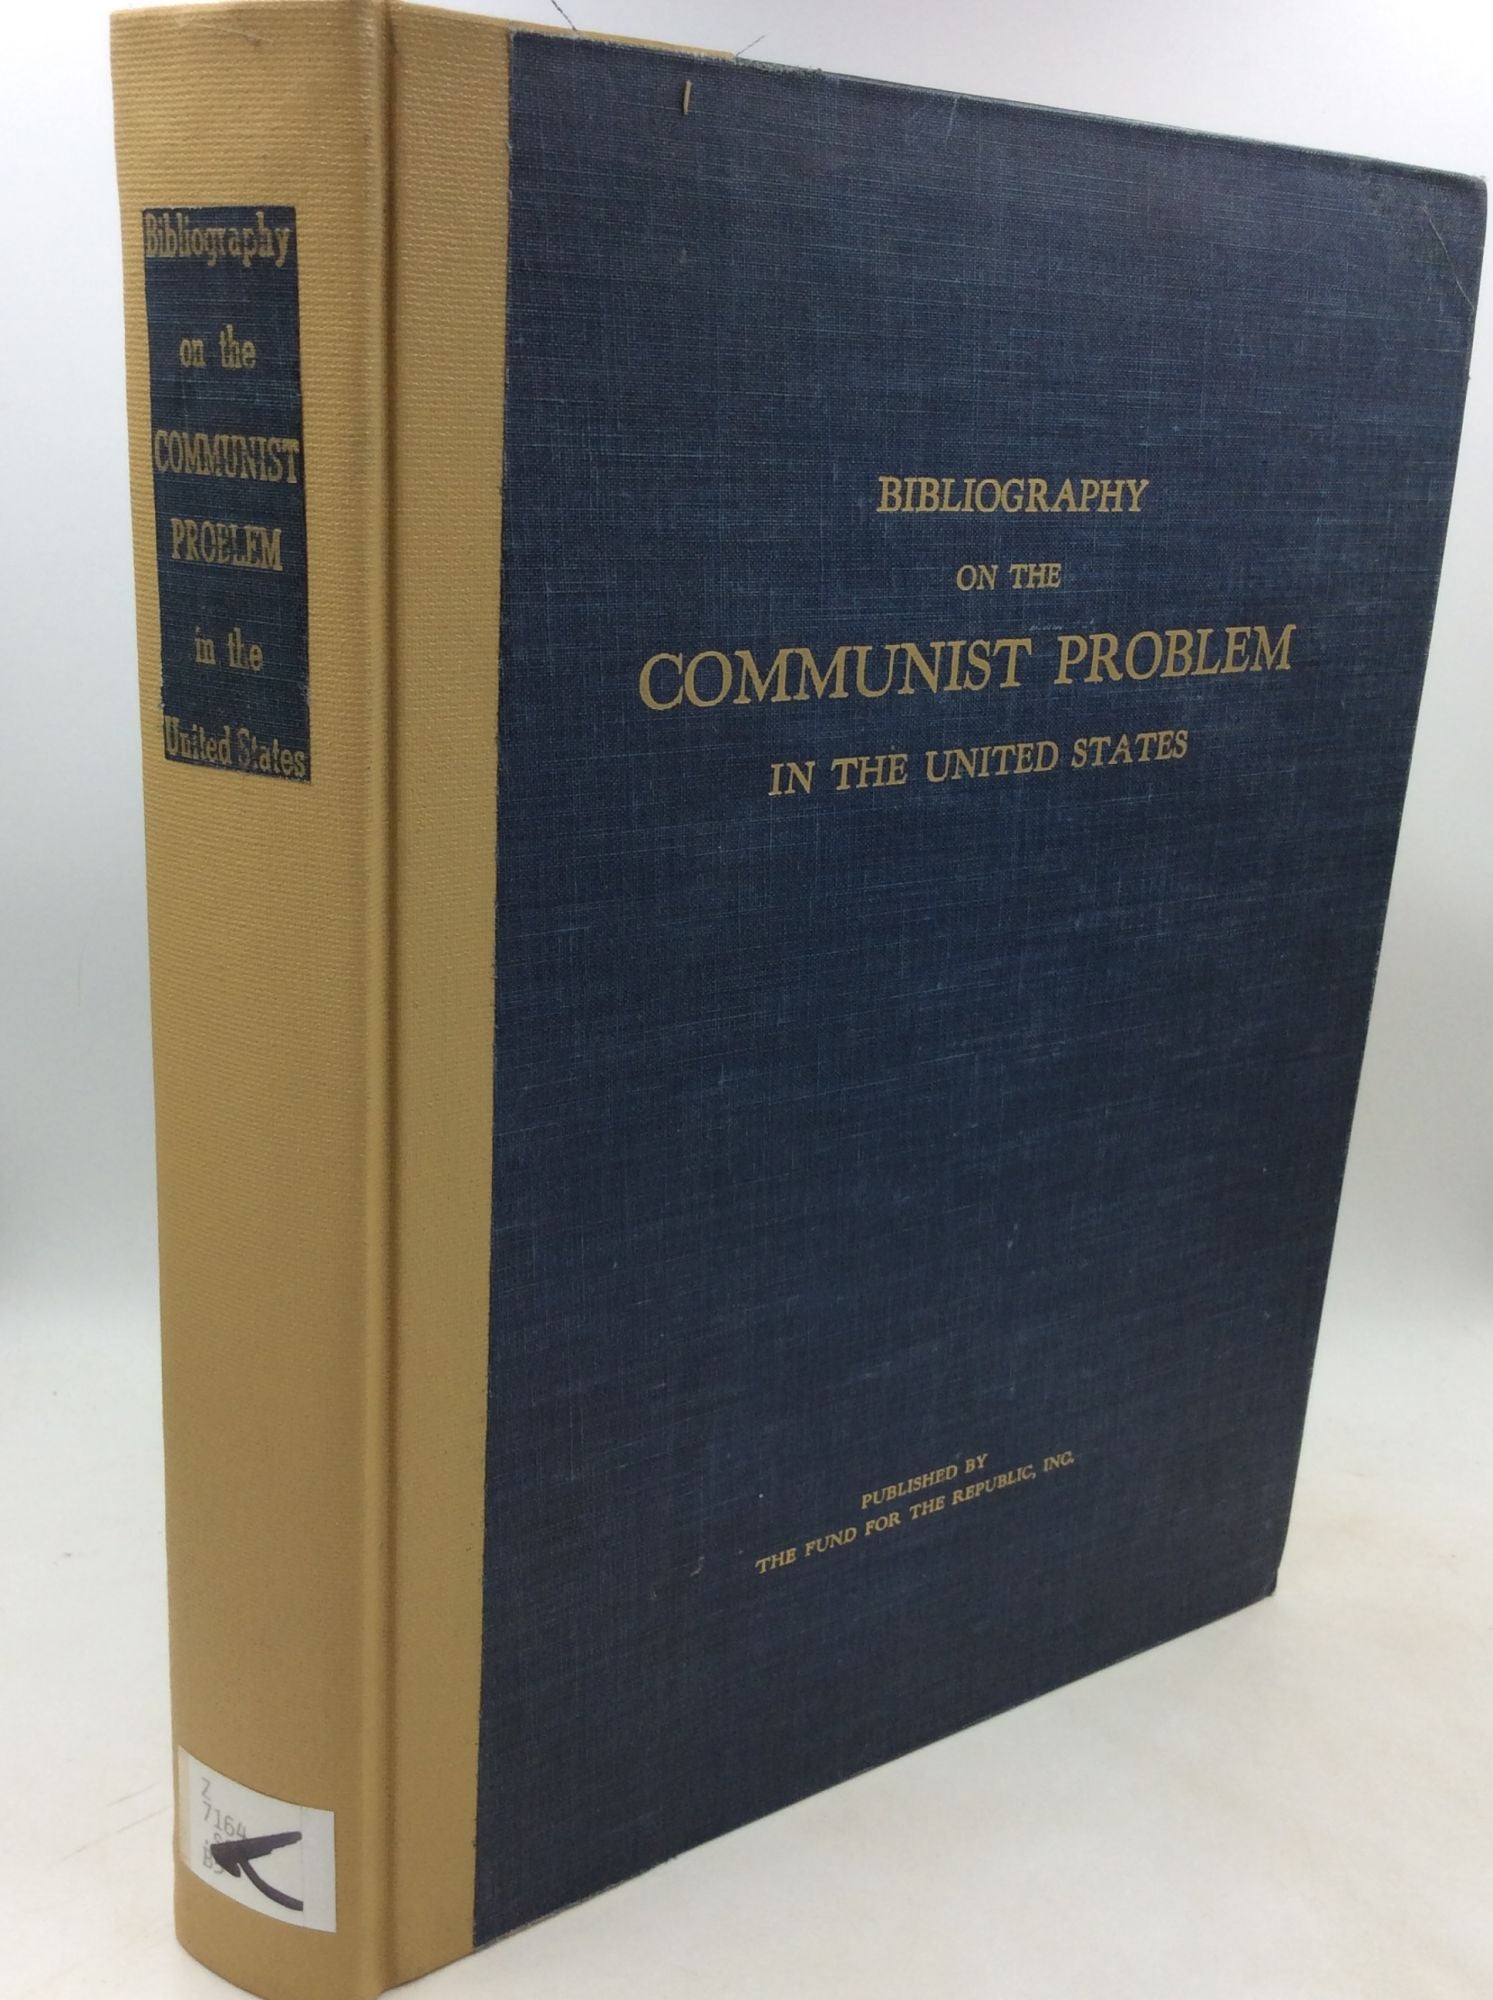  - Bibliography on the Communist Problem in the United States